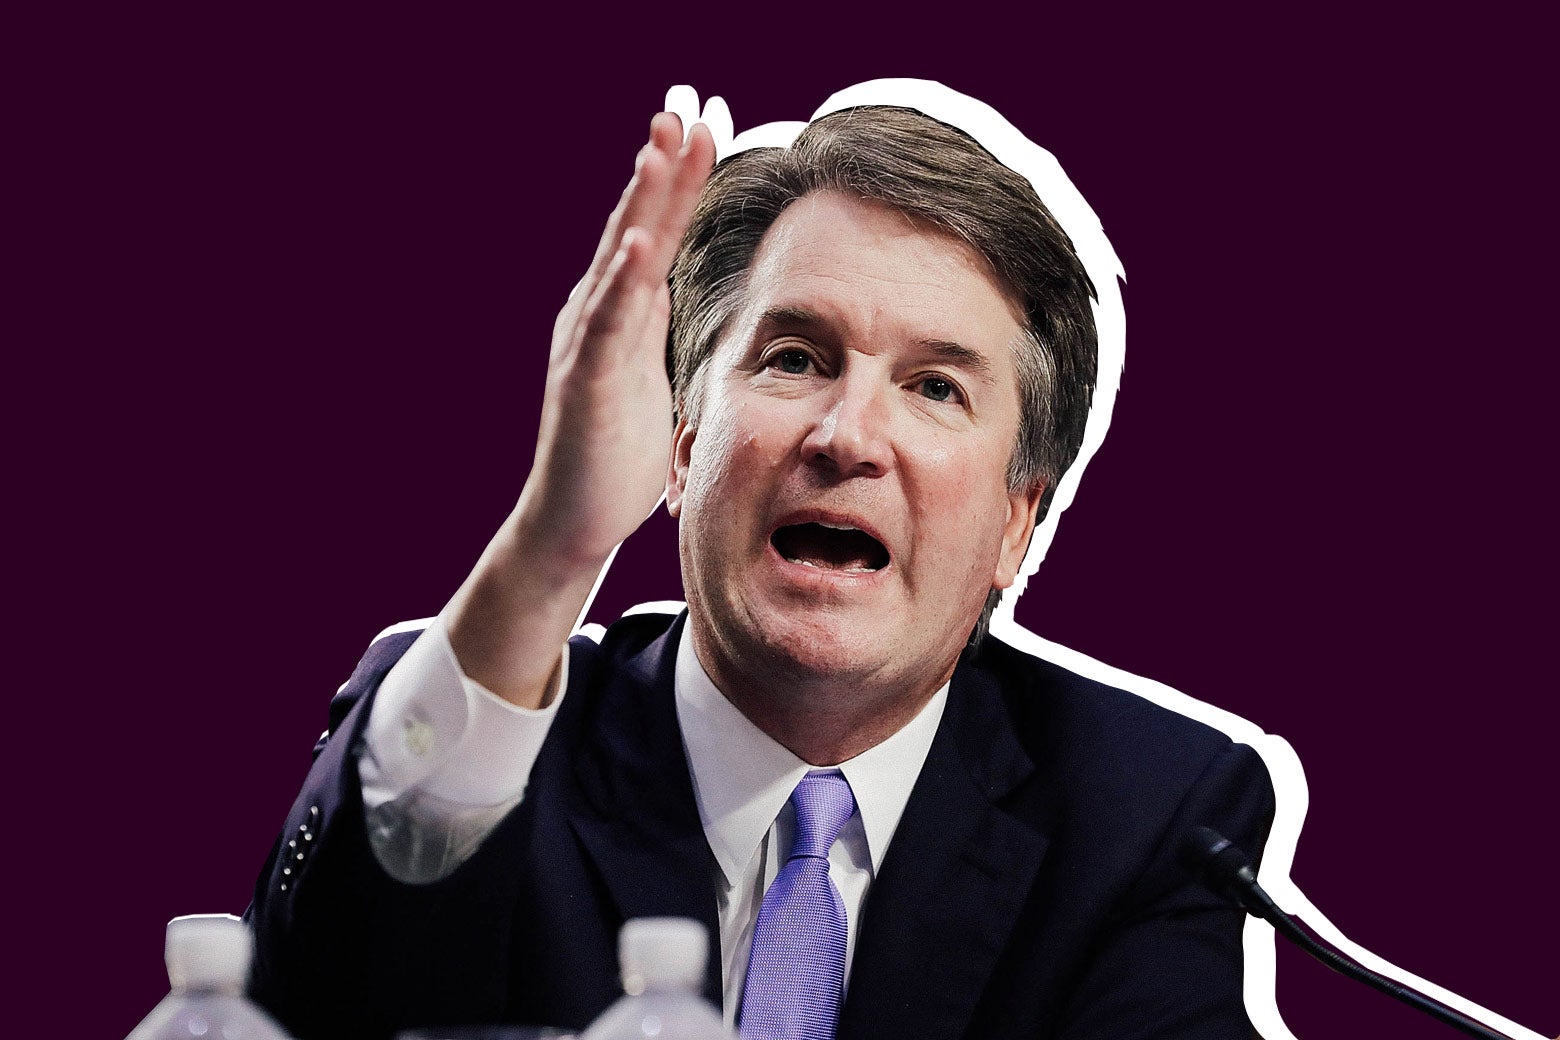 Brett Kavanaugh raising his hand in front of his face while testifying at his Supreme Court confirmation hearing.